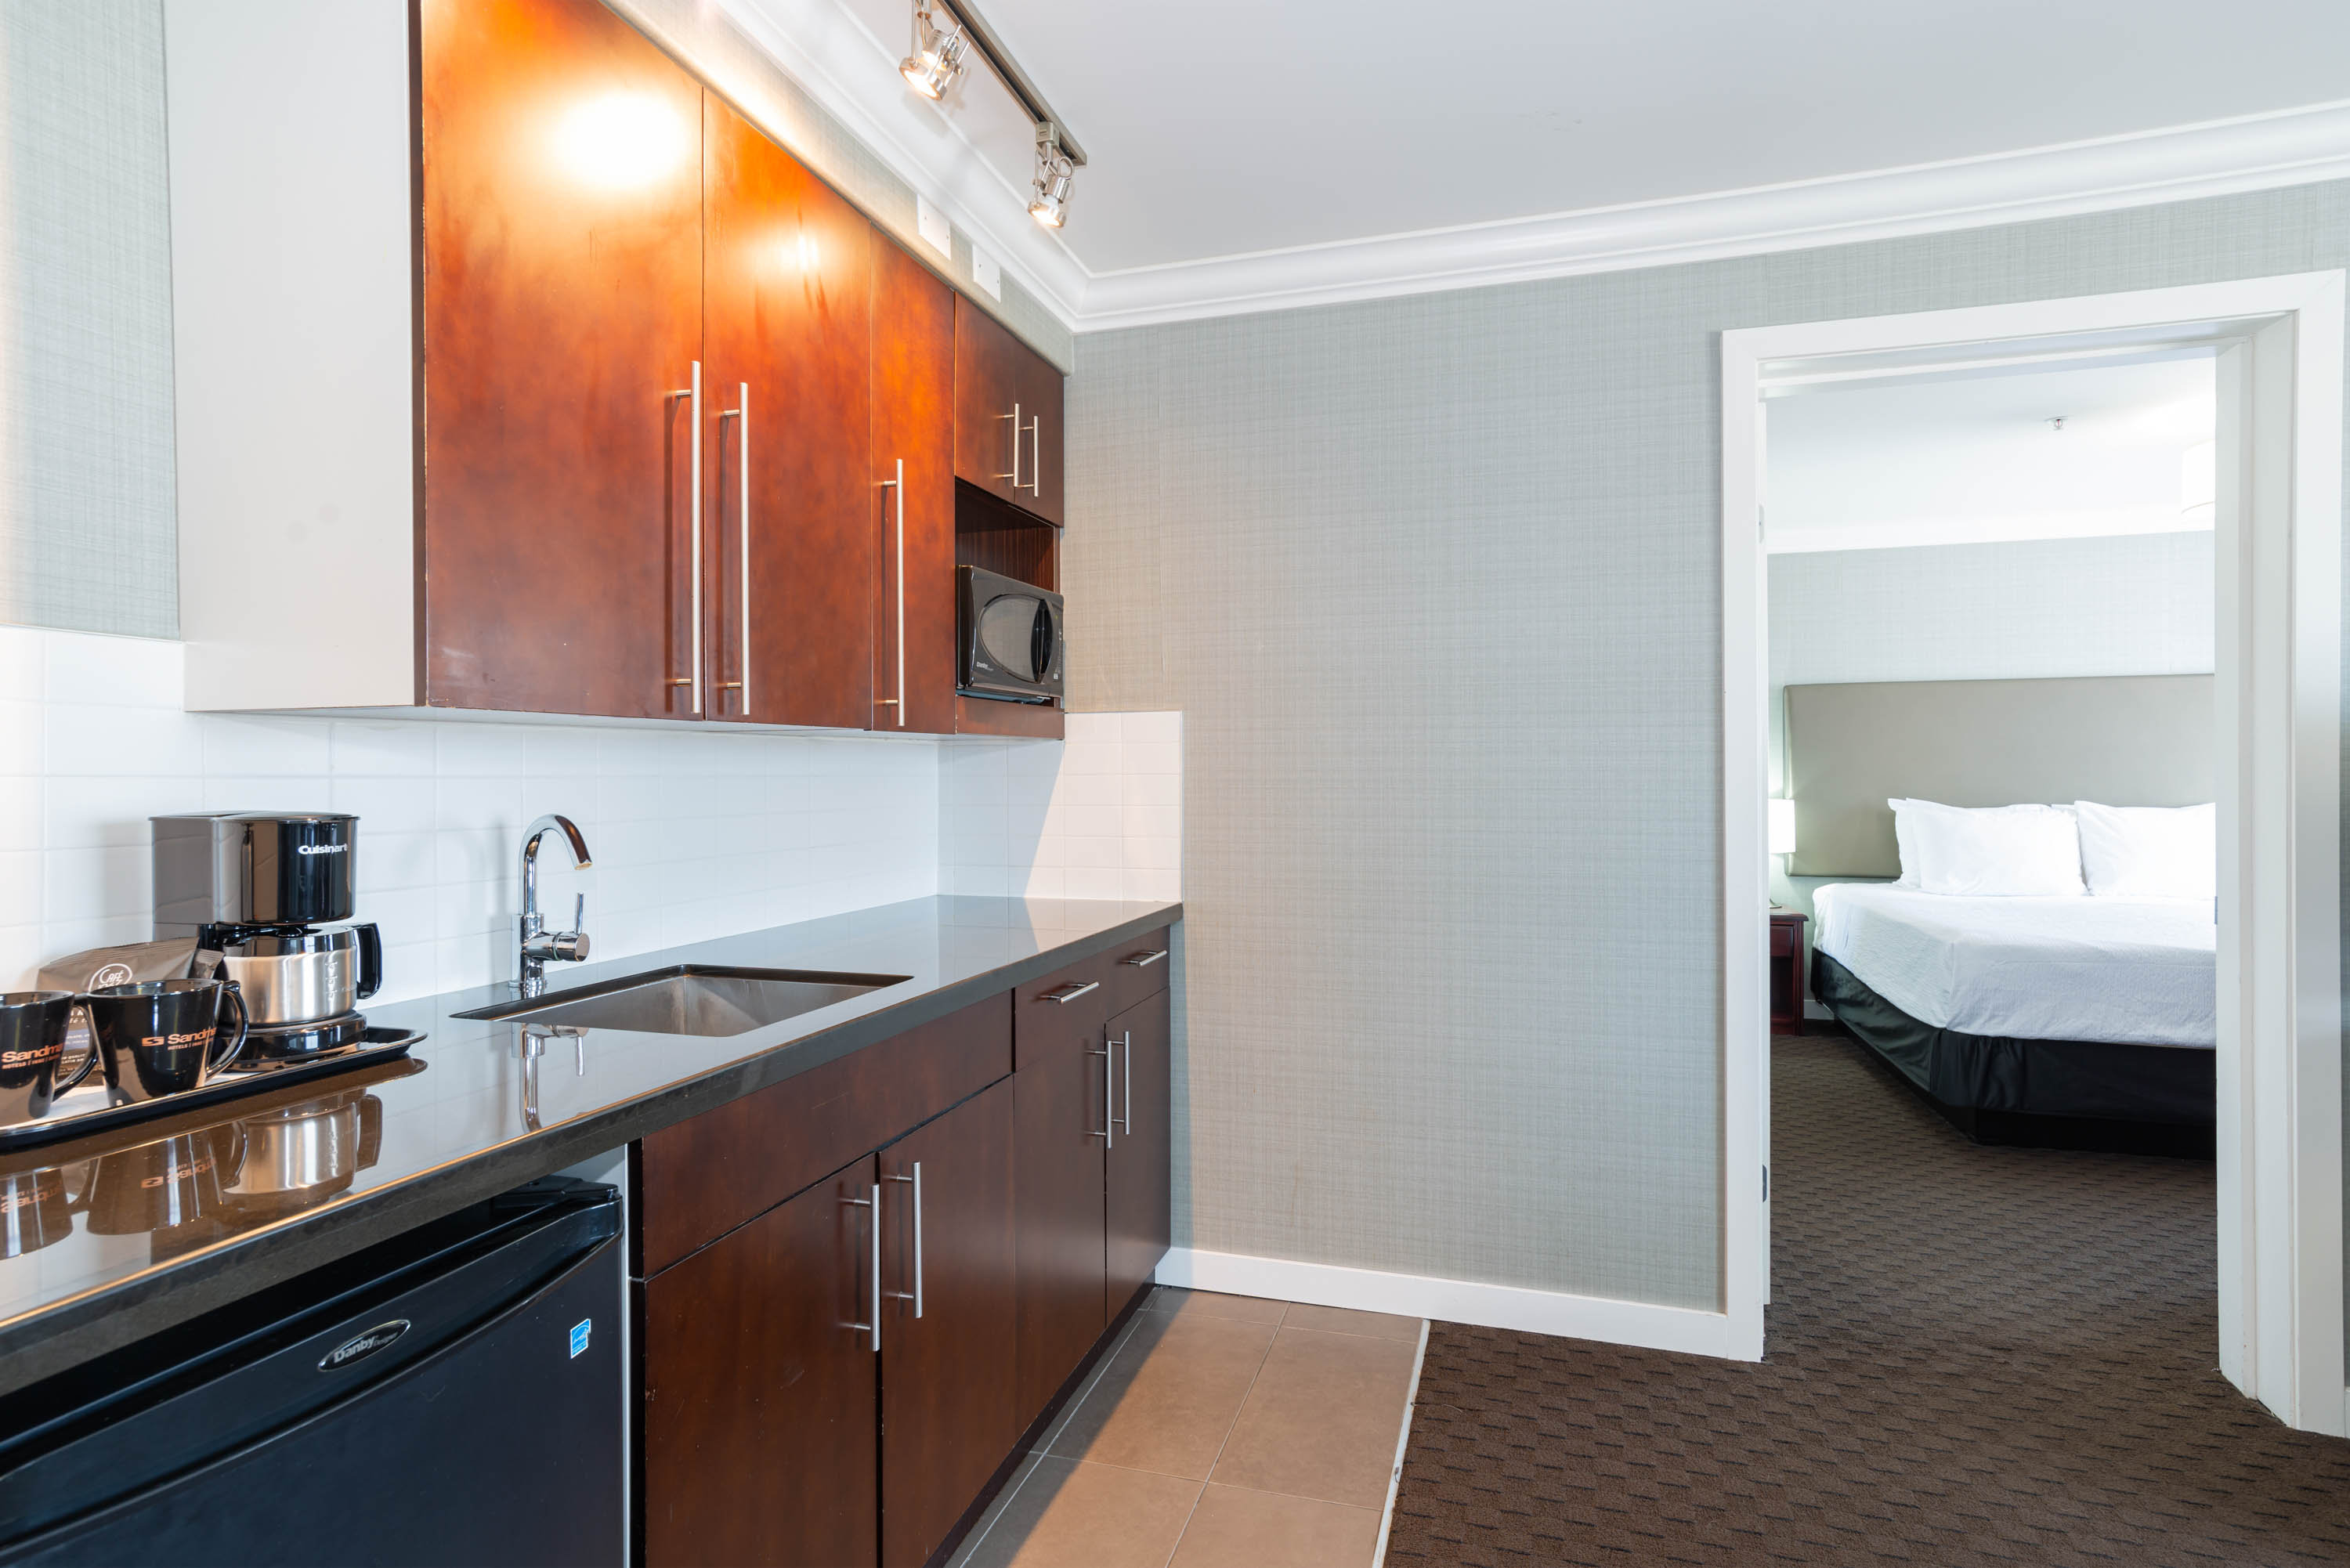 Grand Suite, 1 King Bed, Sofa Bed, Kitchenette